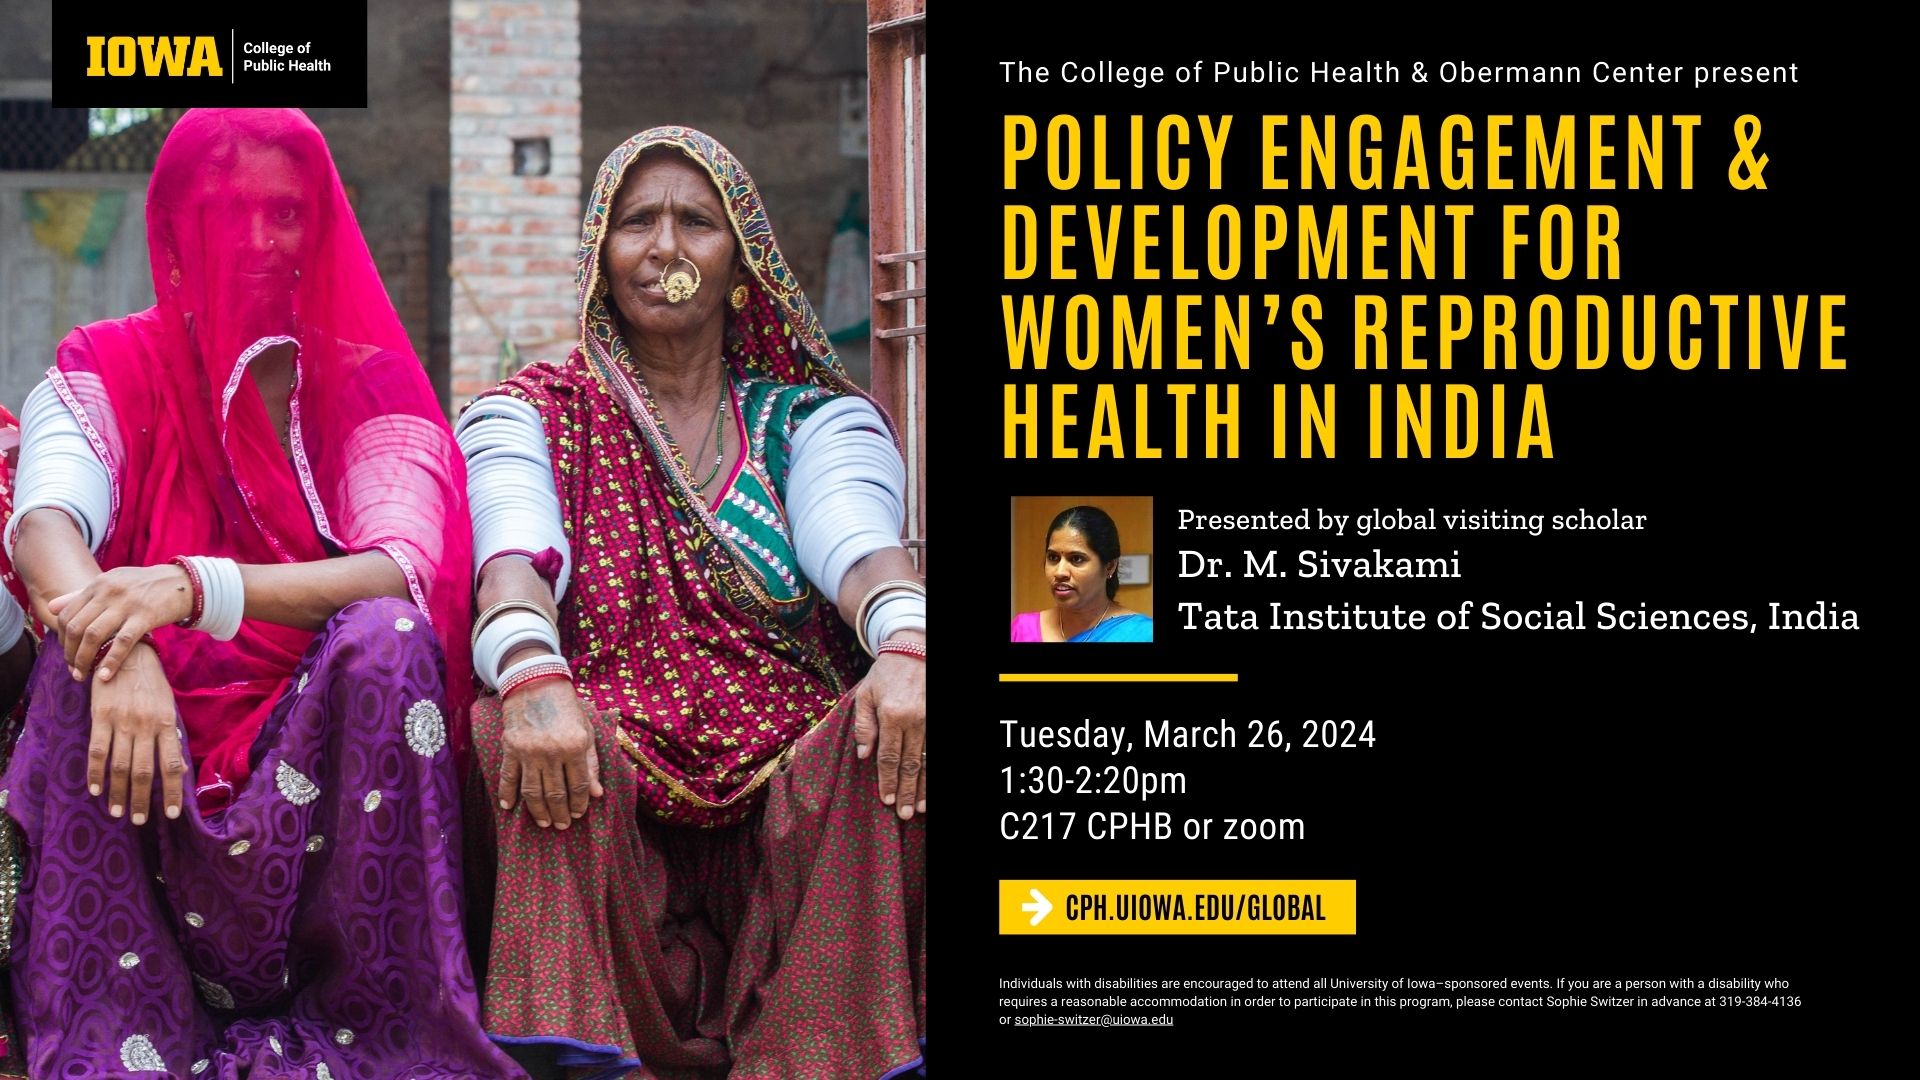 Global Visiting Scholar Presentation: Policy Engagement & Development for Women’s Reproductive Health in India promotional image